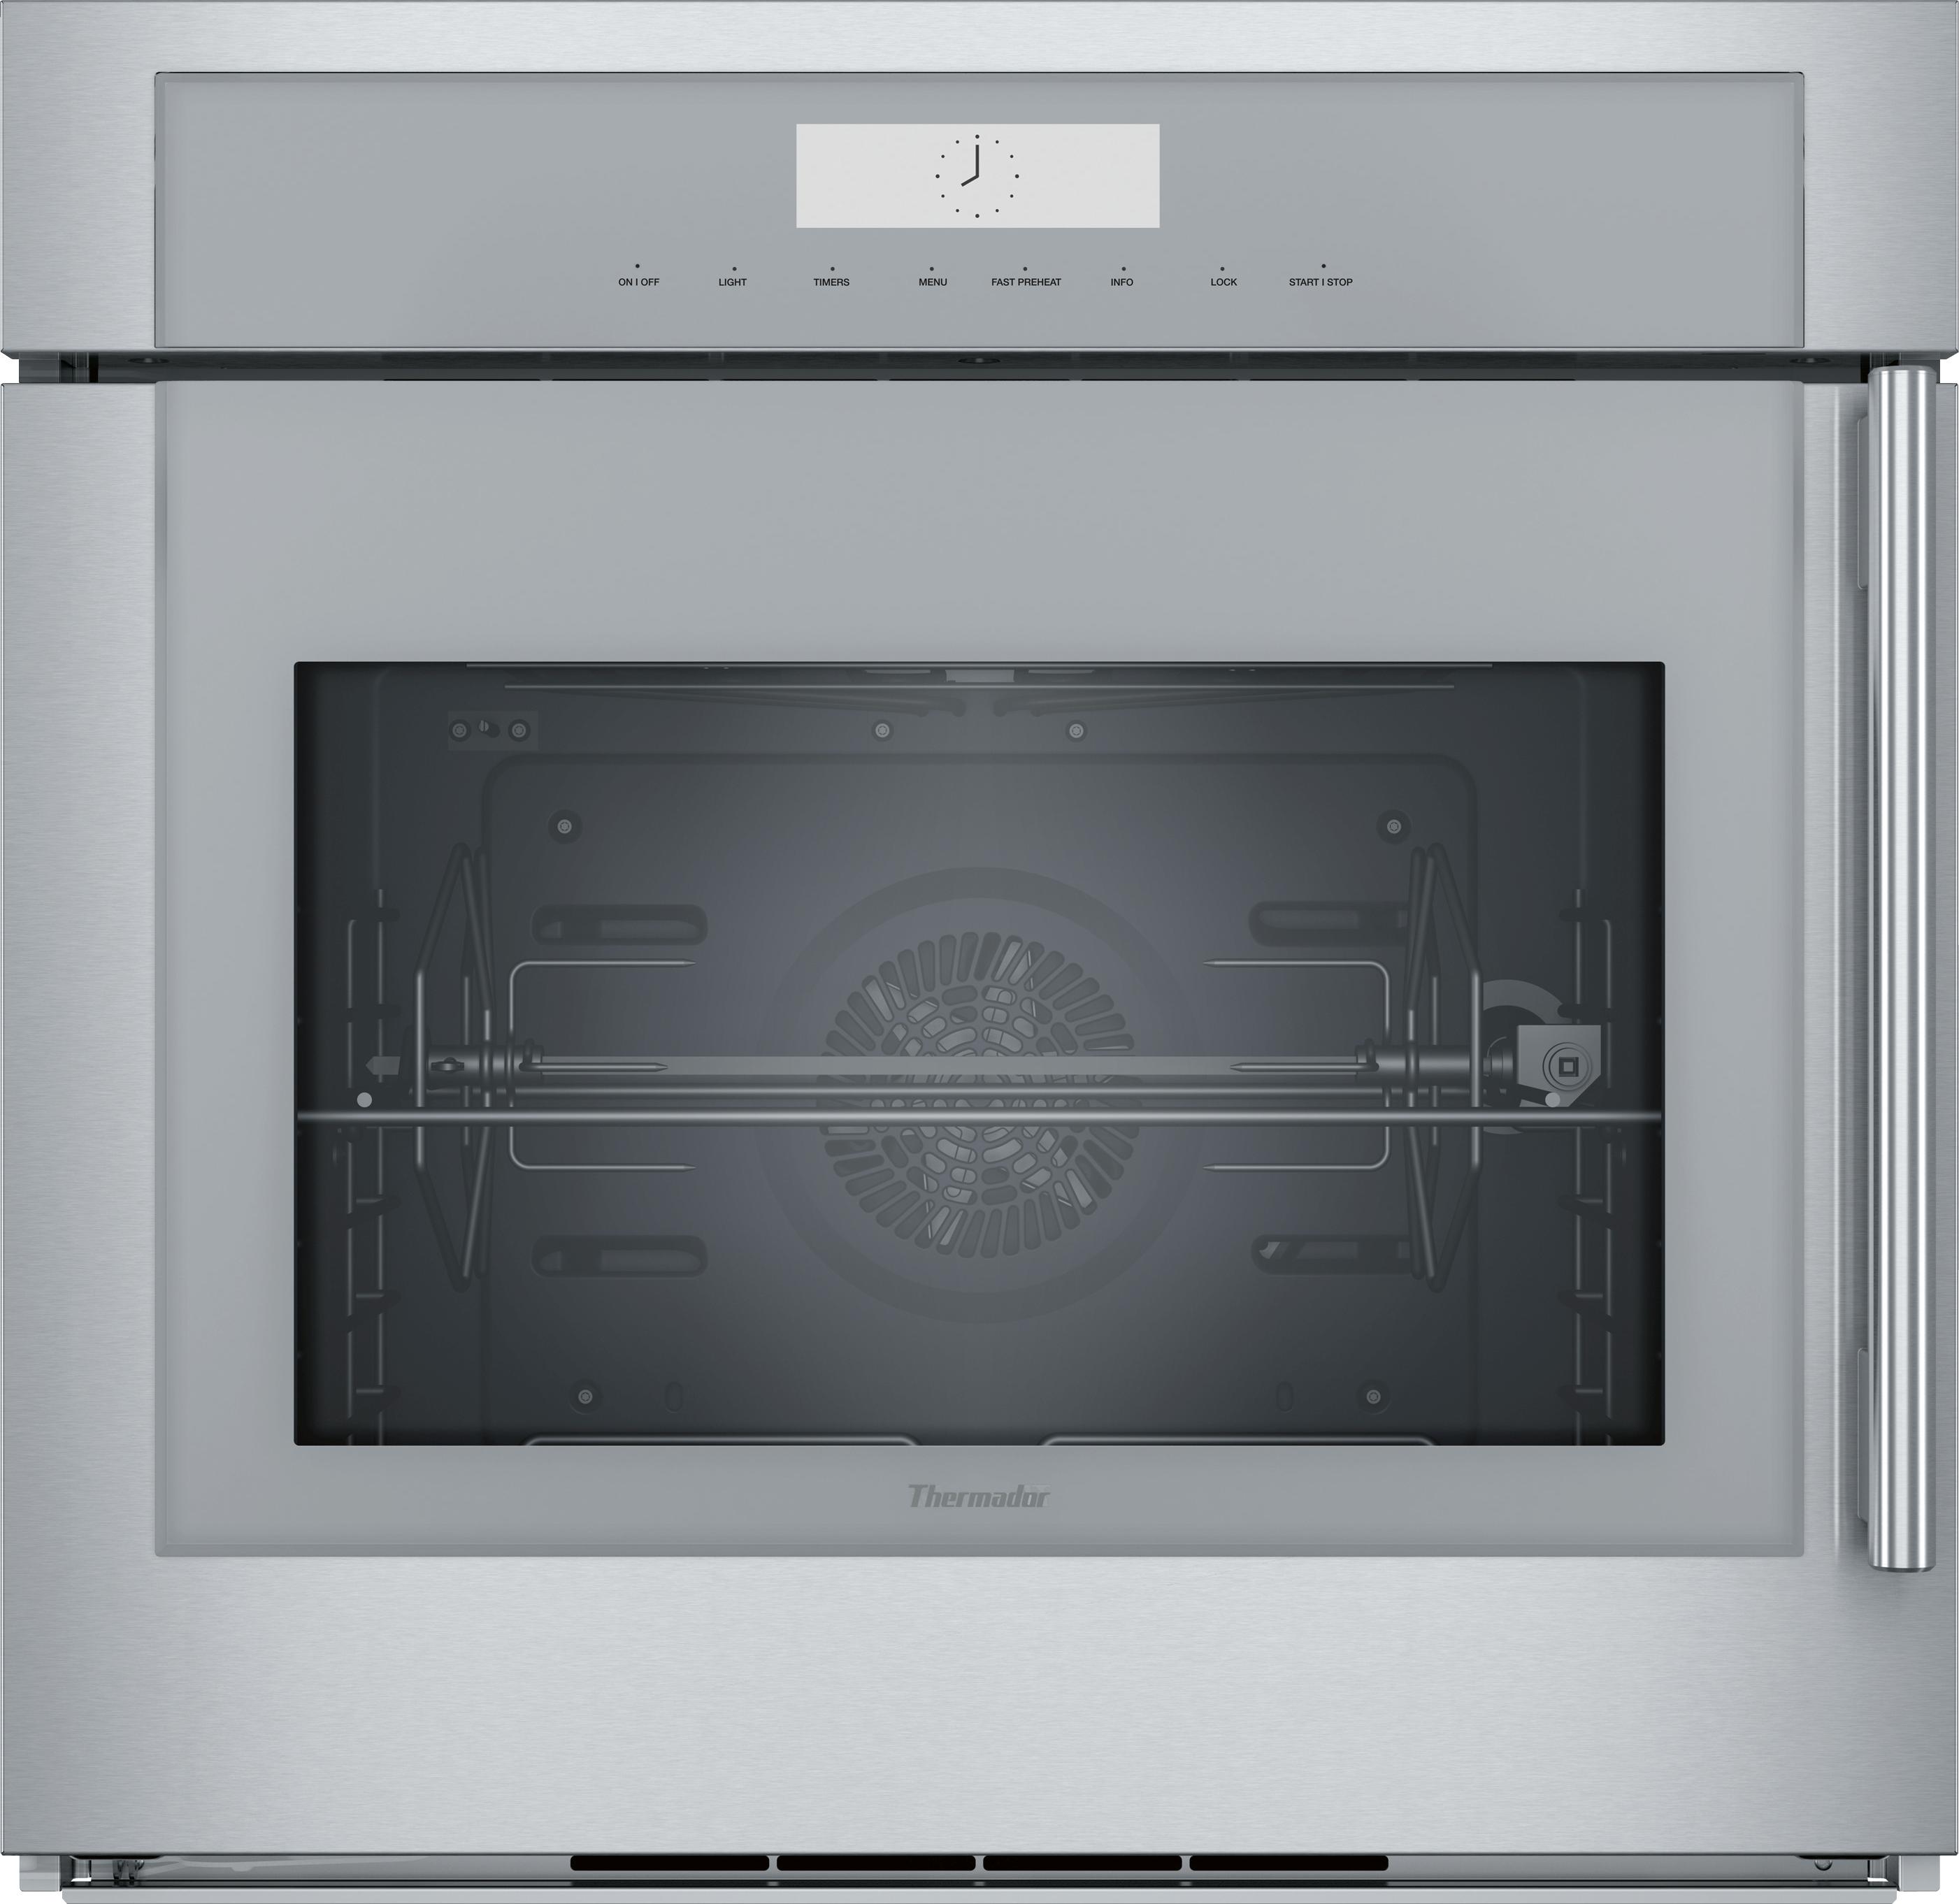 Thermador® Masterpiece® 30" Stainless Steel Electric Built in Single Oven-MED301LWS